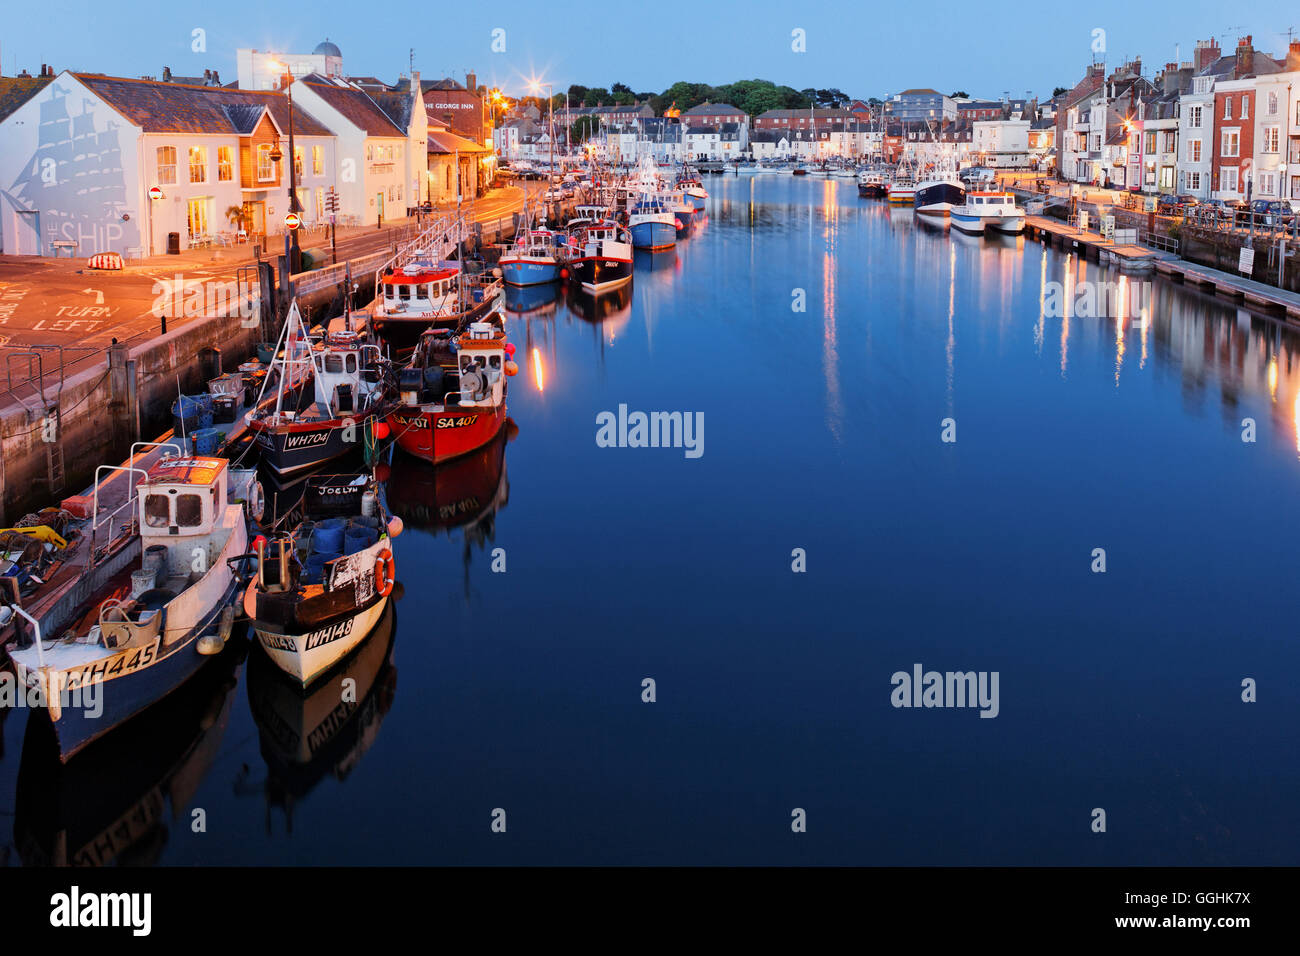 Weymouth Harbour at night, Weymouth, Dorset, England, Great Britain Stock Photo